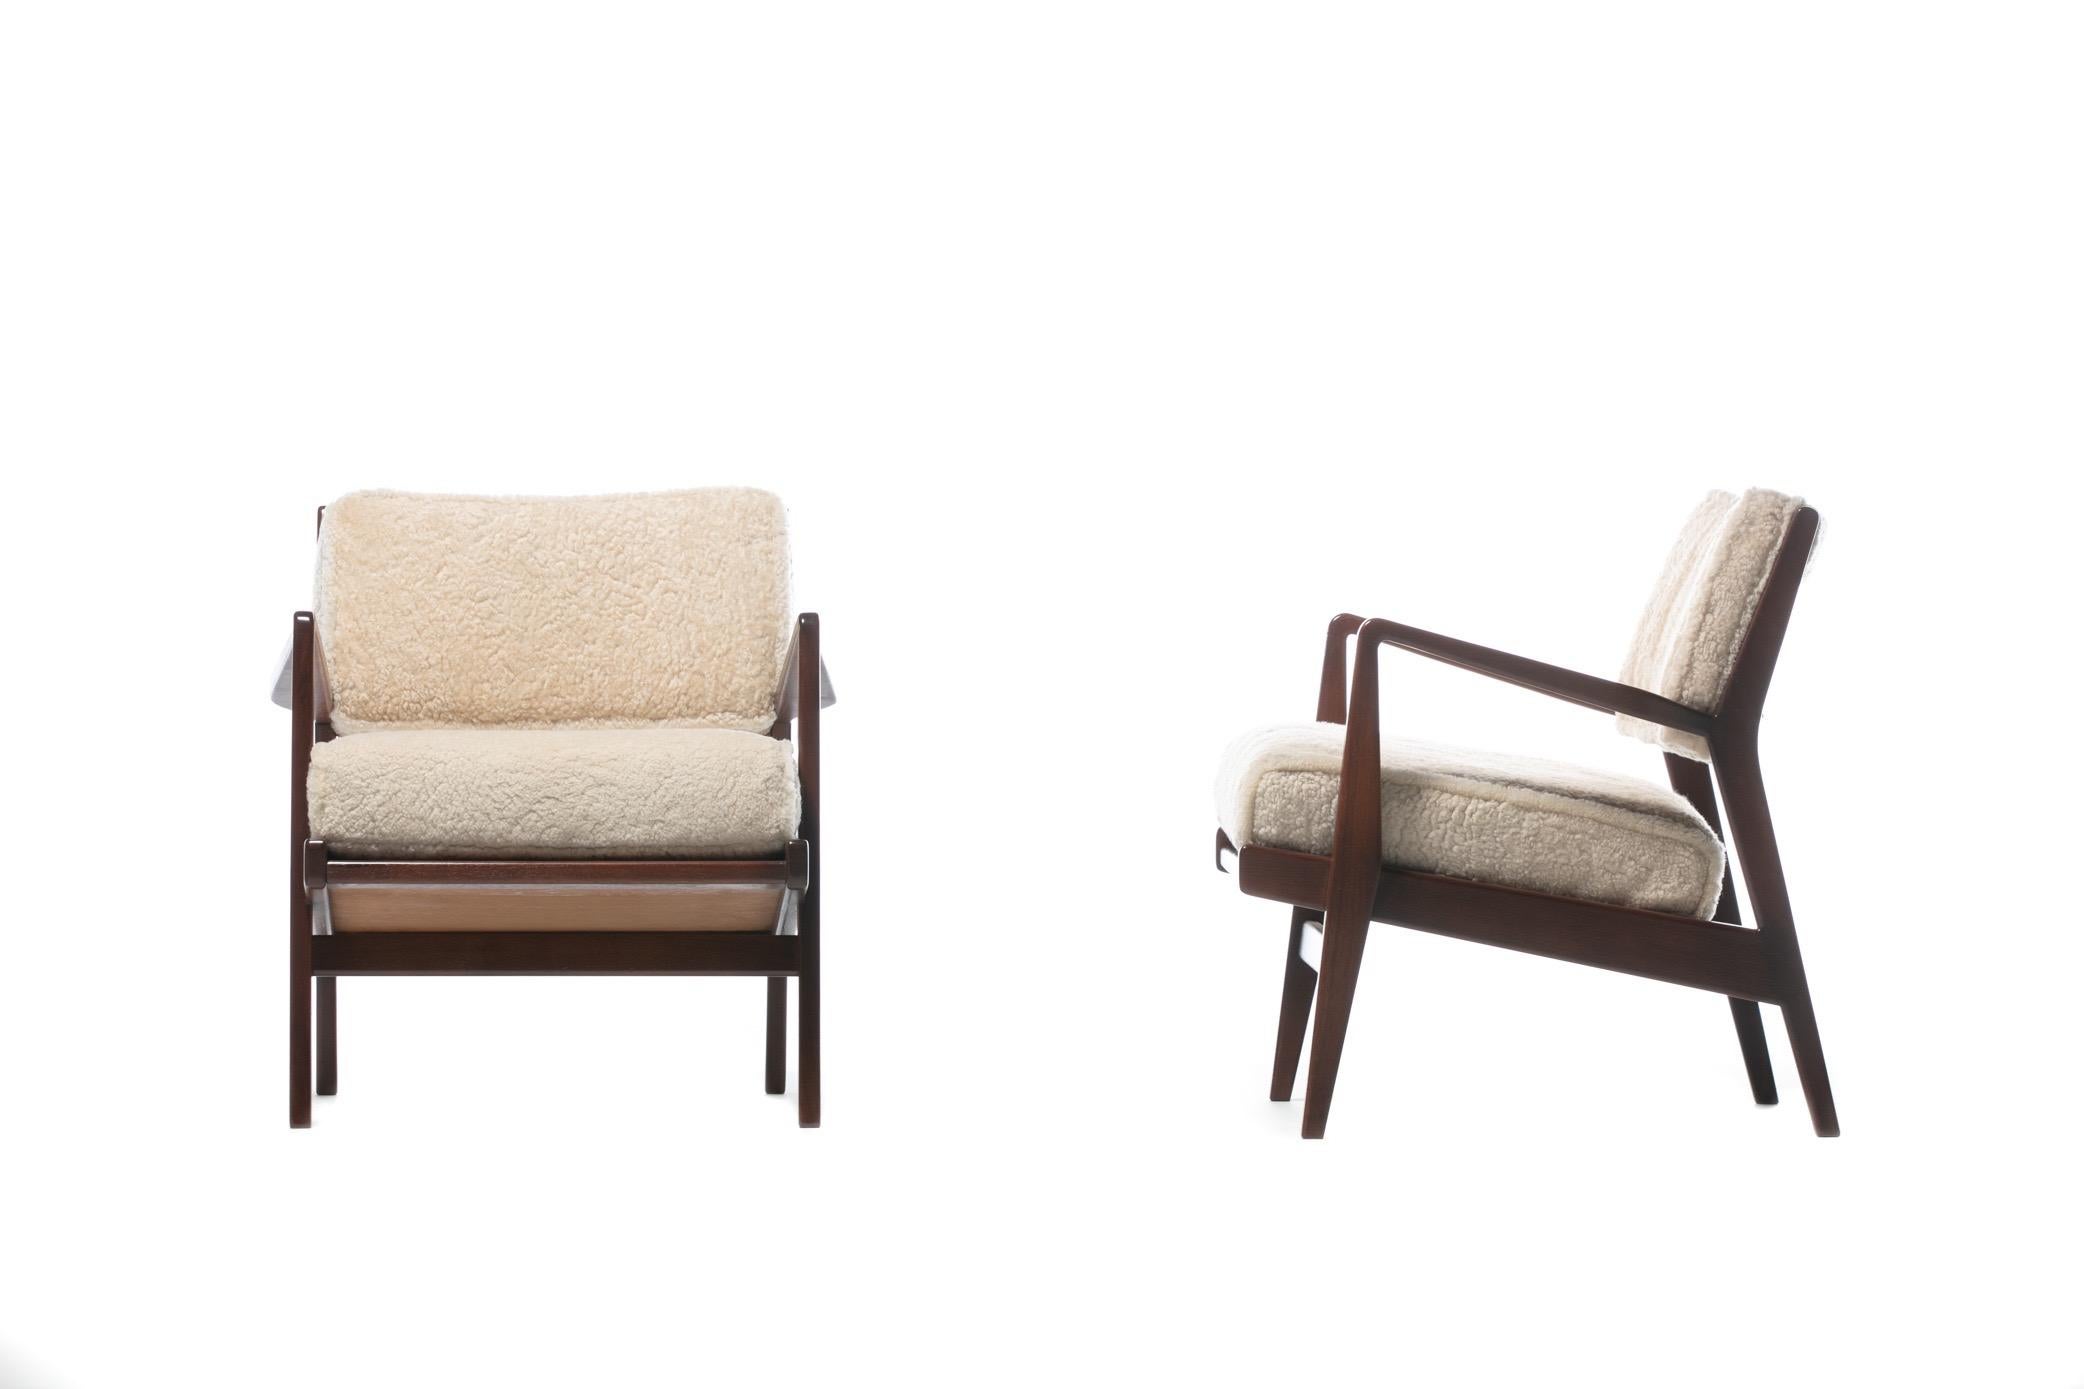 Danish Jens Risom Walnut Lounge Chairs in Ivory Shearling, circa 1950s For Sale